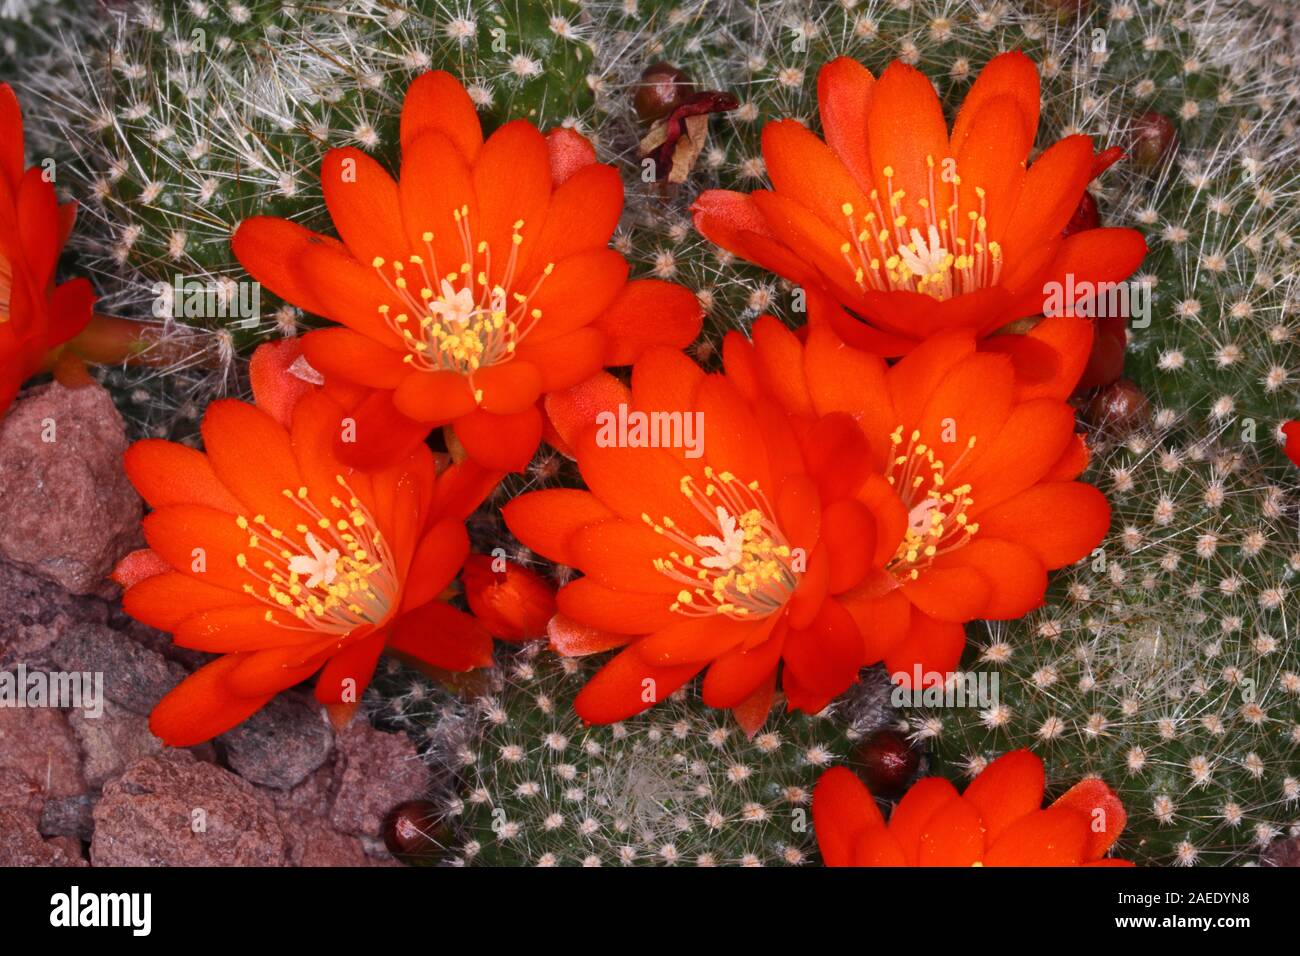 Rebutia minuscula is a species of cactus from northern Argentina. Flowers are red, up to 4 cm (1.6 in) long. Stock Photo